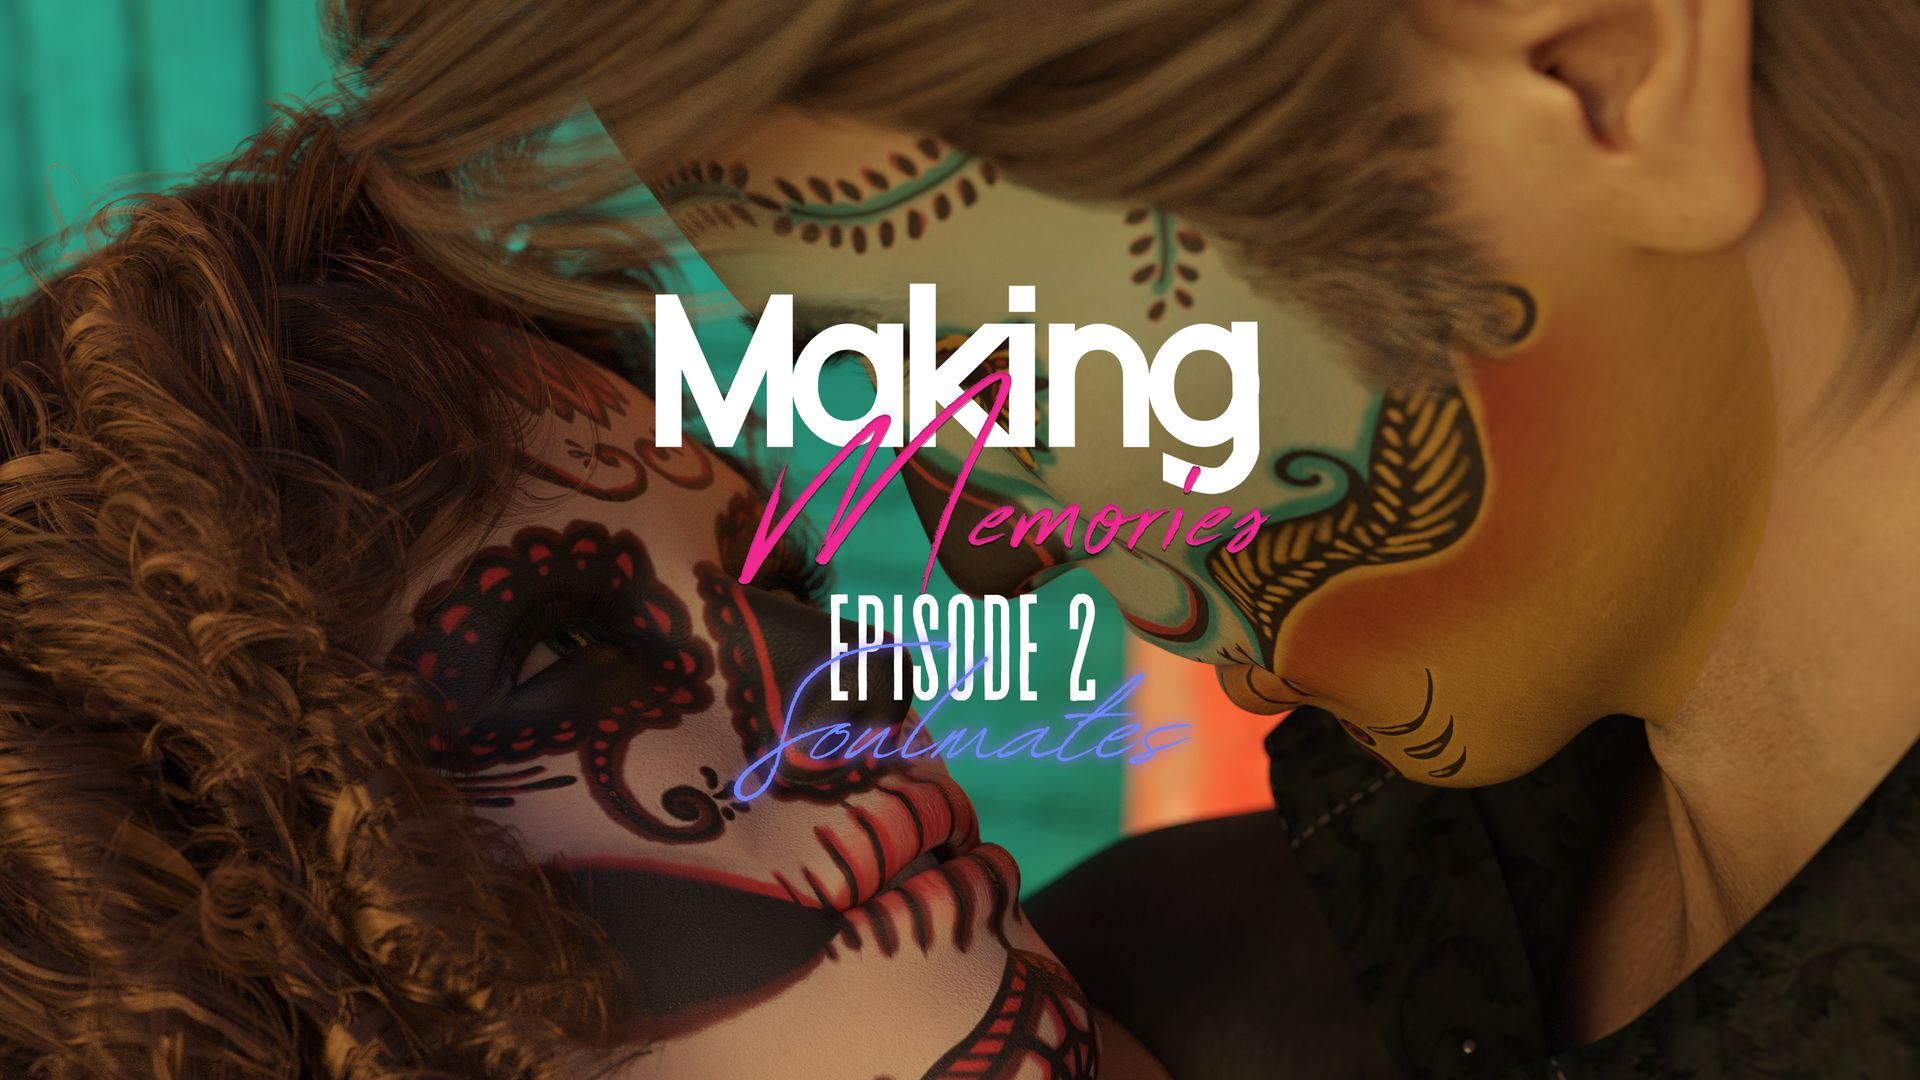 Making Memories porn xxx game download cover